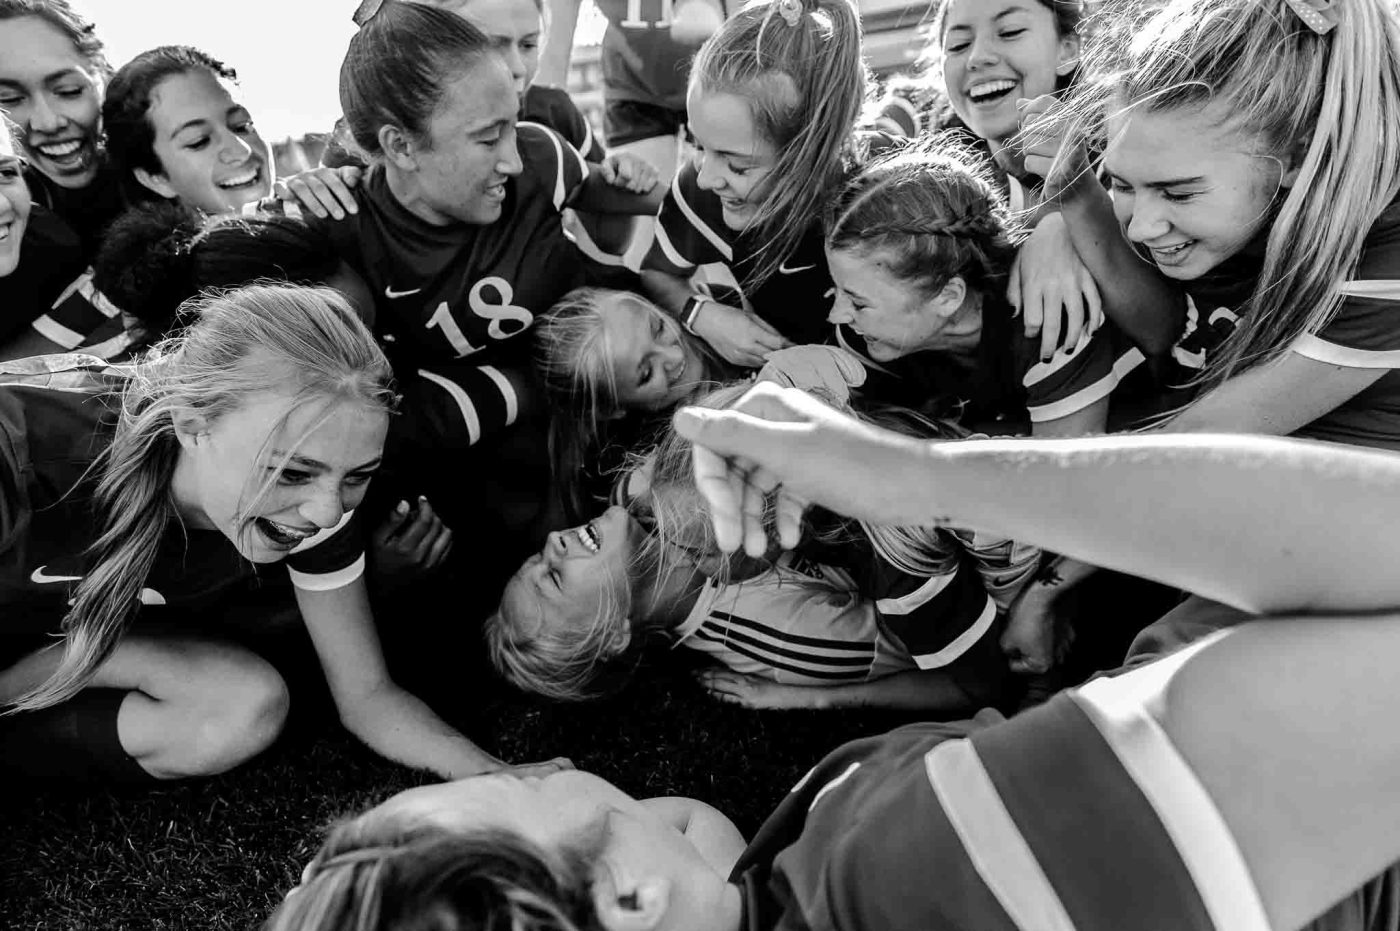 Trent Nelson  |  The Salt Lake Tribune
Waterford players celebrate defeating Rowland-Hall St. Marks in the 2A High School Girl's Soccer Championship game at Rio Tinto Stadium in Sandy, Saturday October 22, 2016.